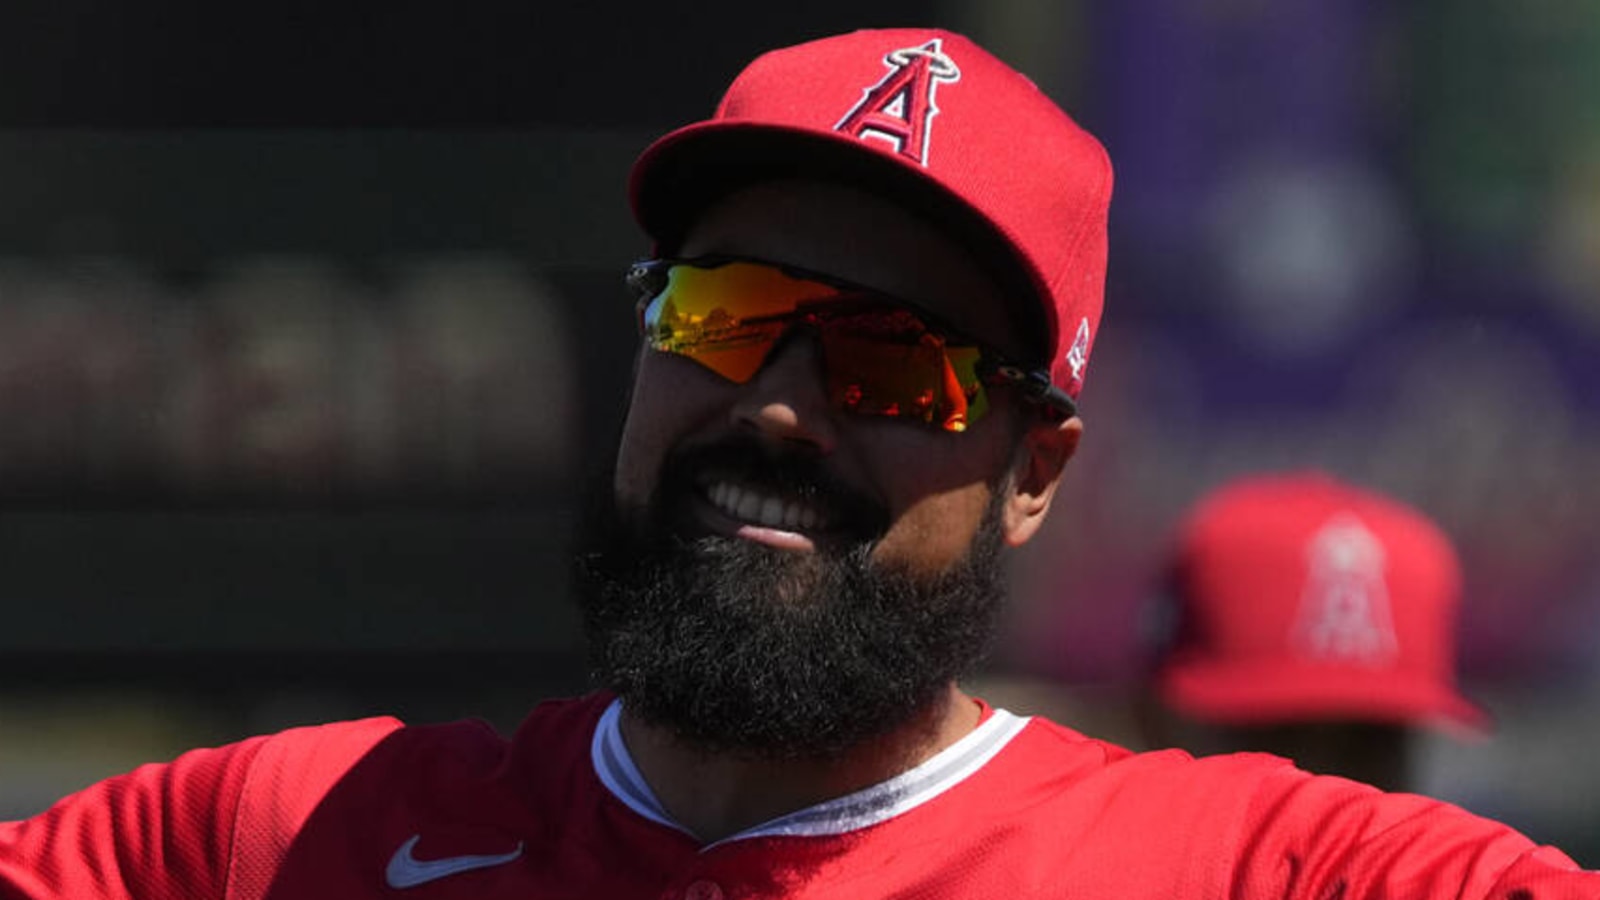 Watch: Angels 3B gets booed after 0-for-20 start to season